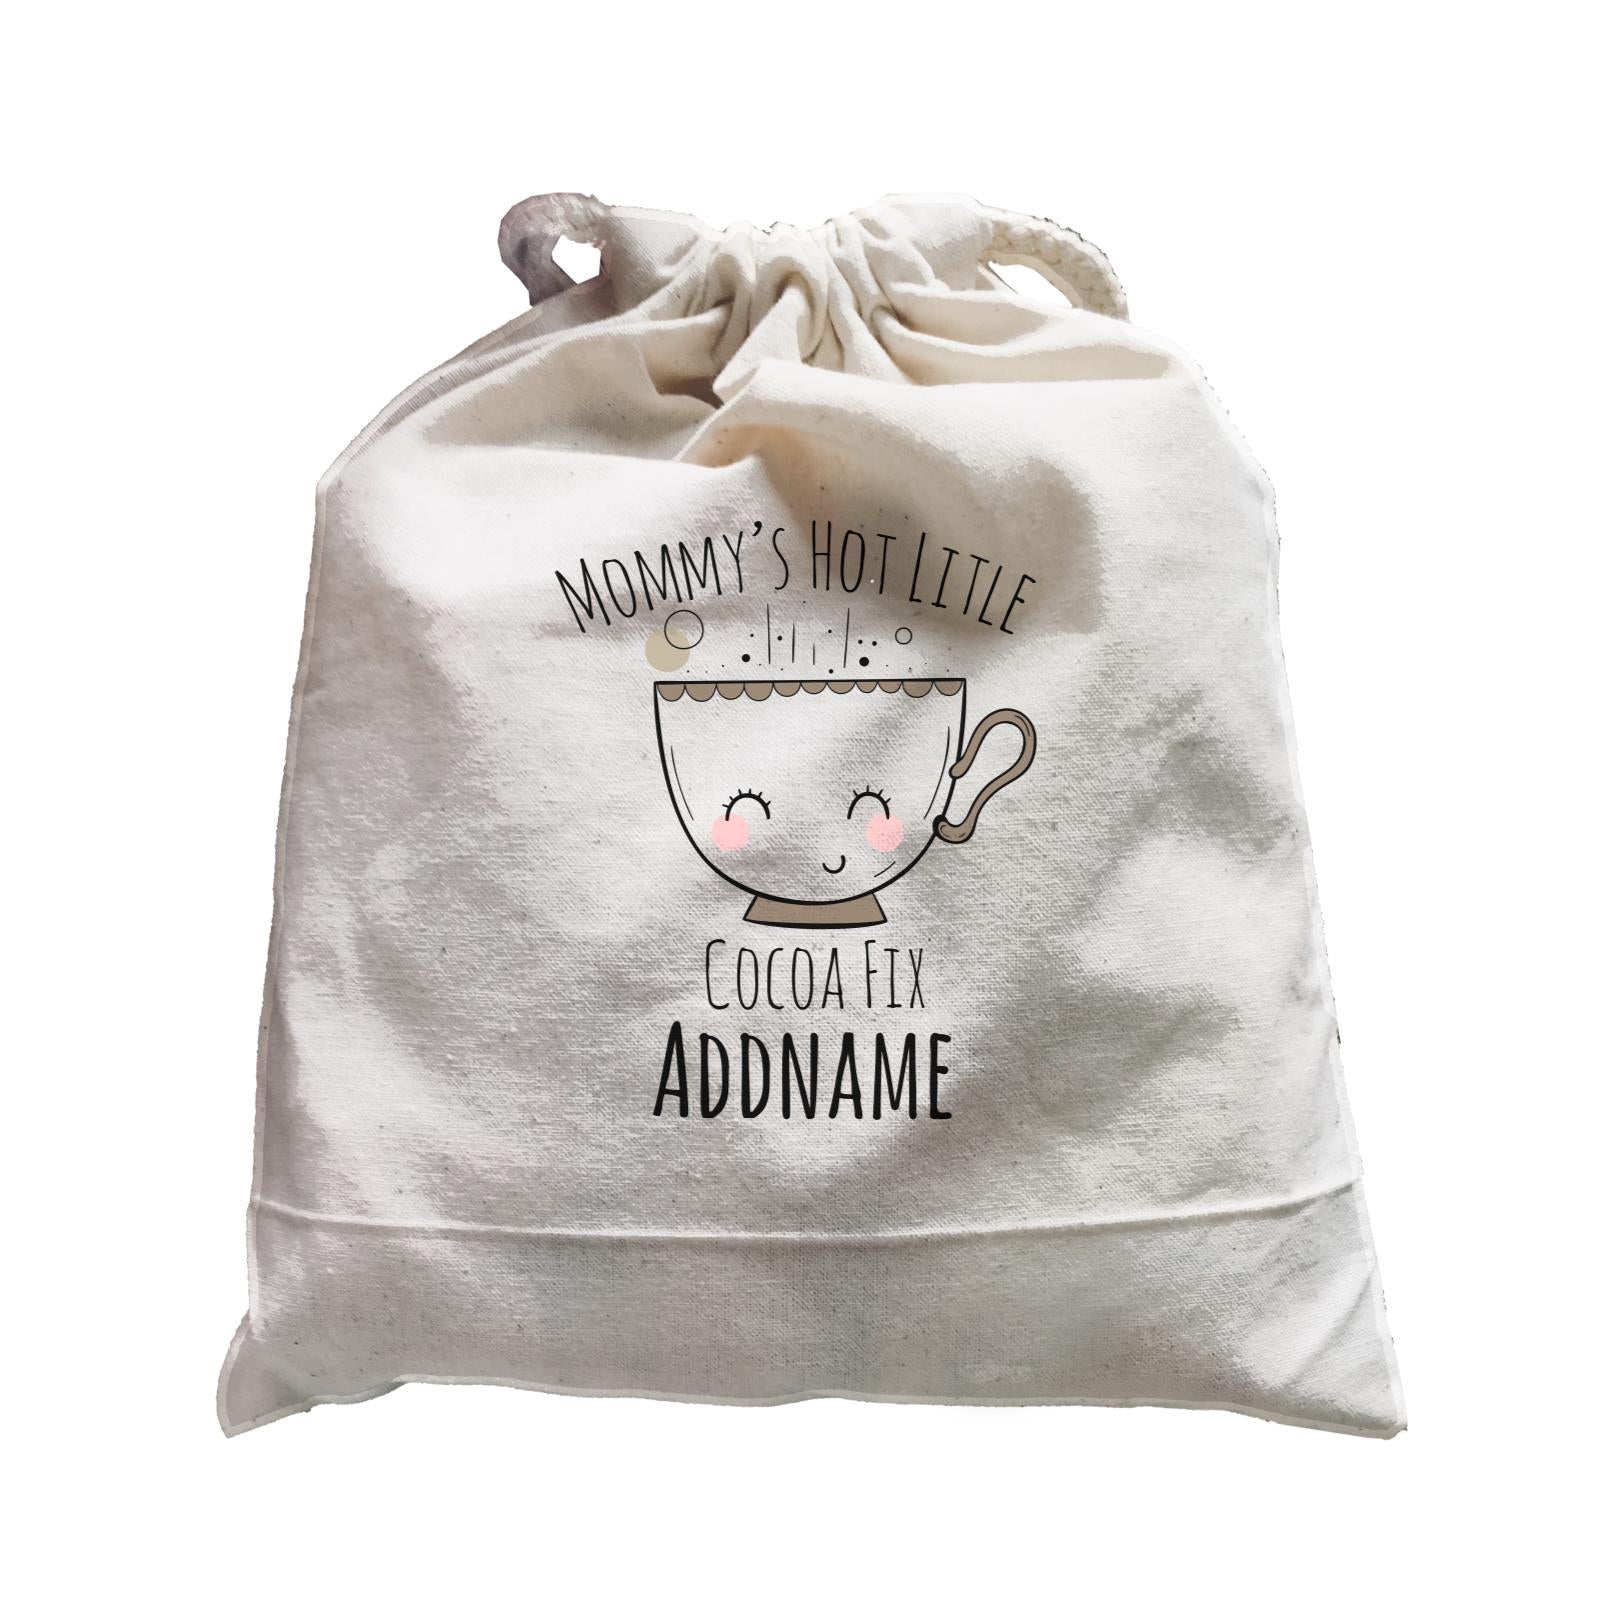 Drawn Sweet Snacks Mommy's Hot Little Cocoa Fix Addname Satchel